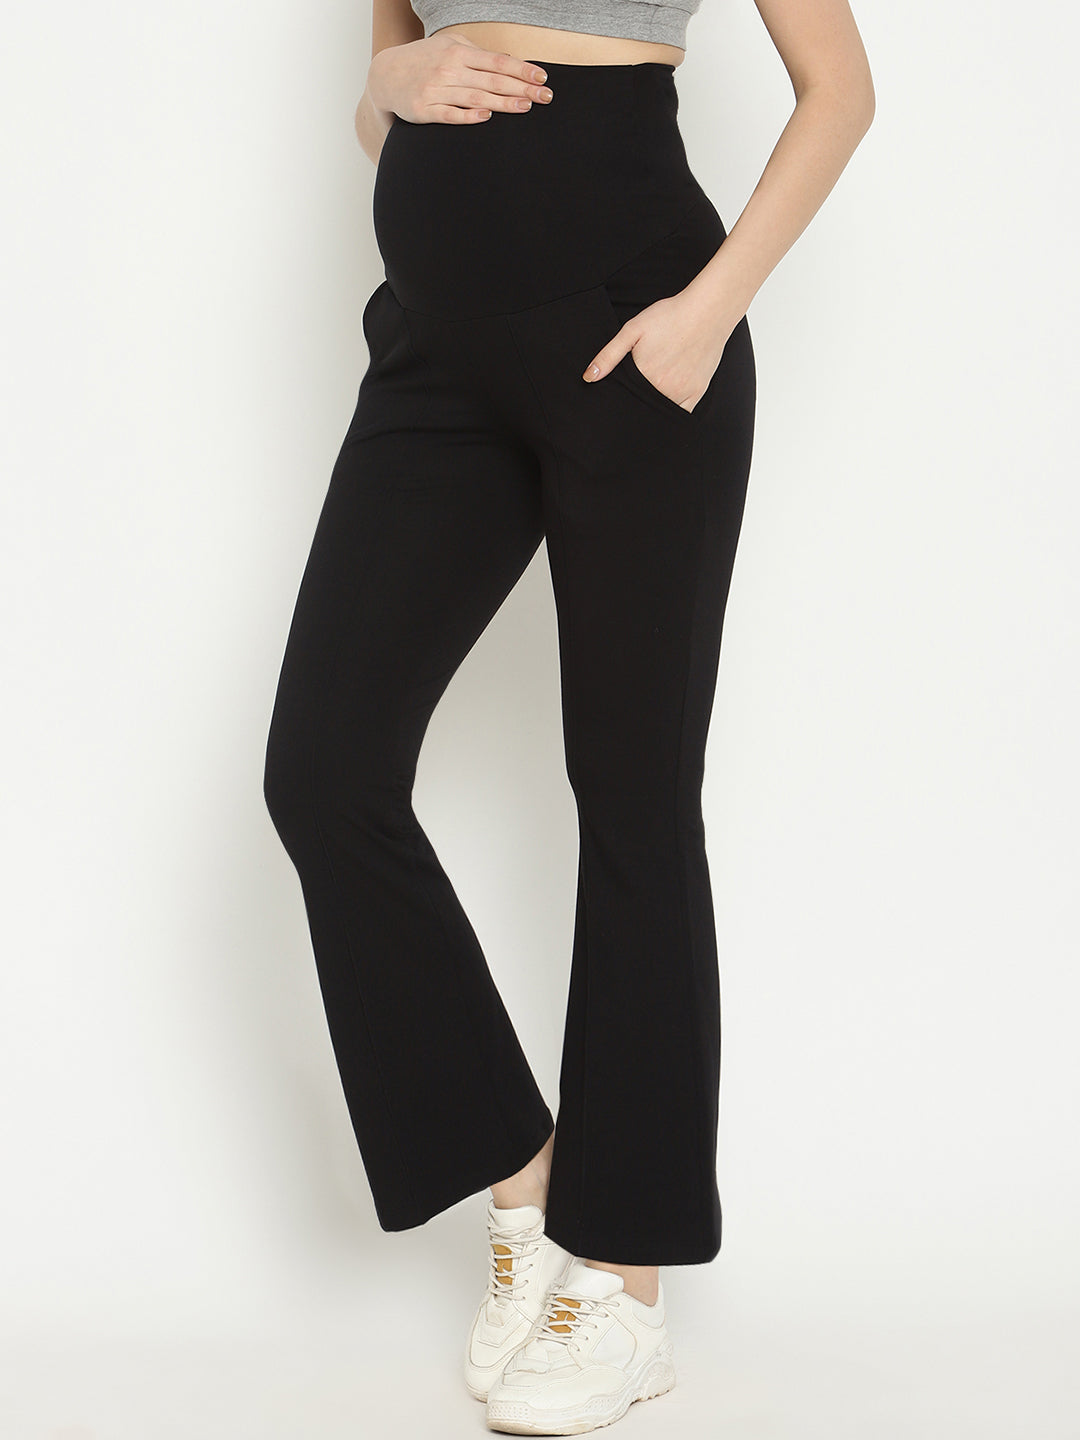 Over the Bump Cotton Flare Maternity Pants - Navy Blue | Wobbly Walk